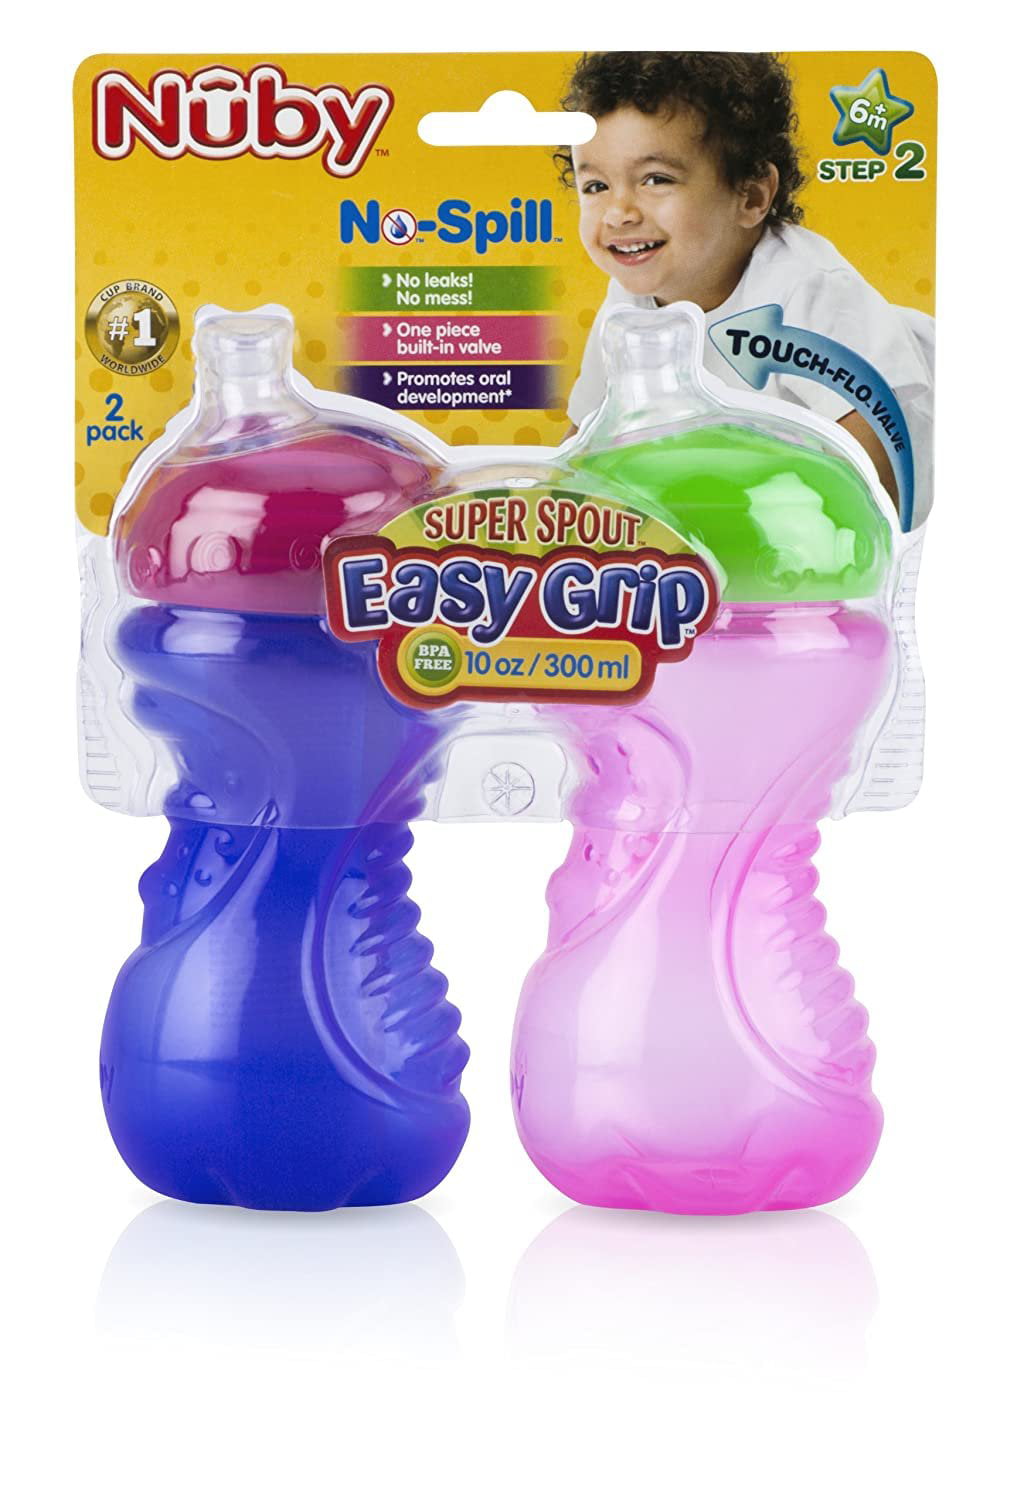 Nuby No-Spill Insulated Cool Sipper, 9 Ounce, (Pack of 2) Blue Robot a –